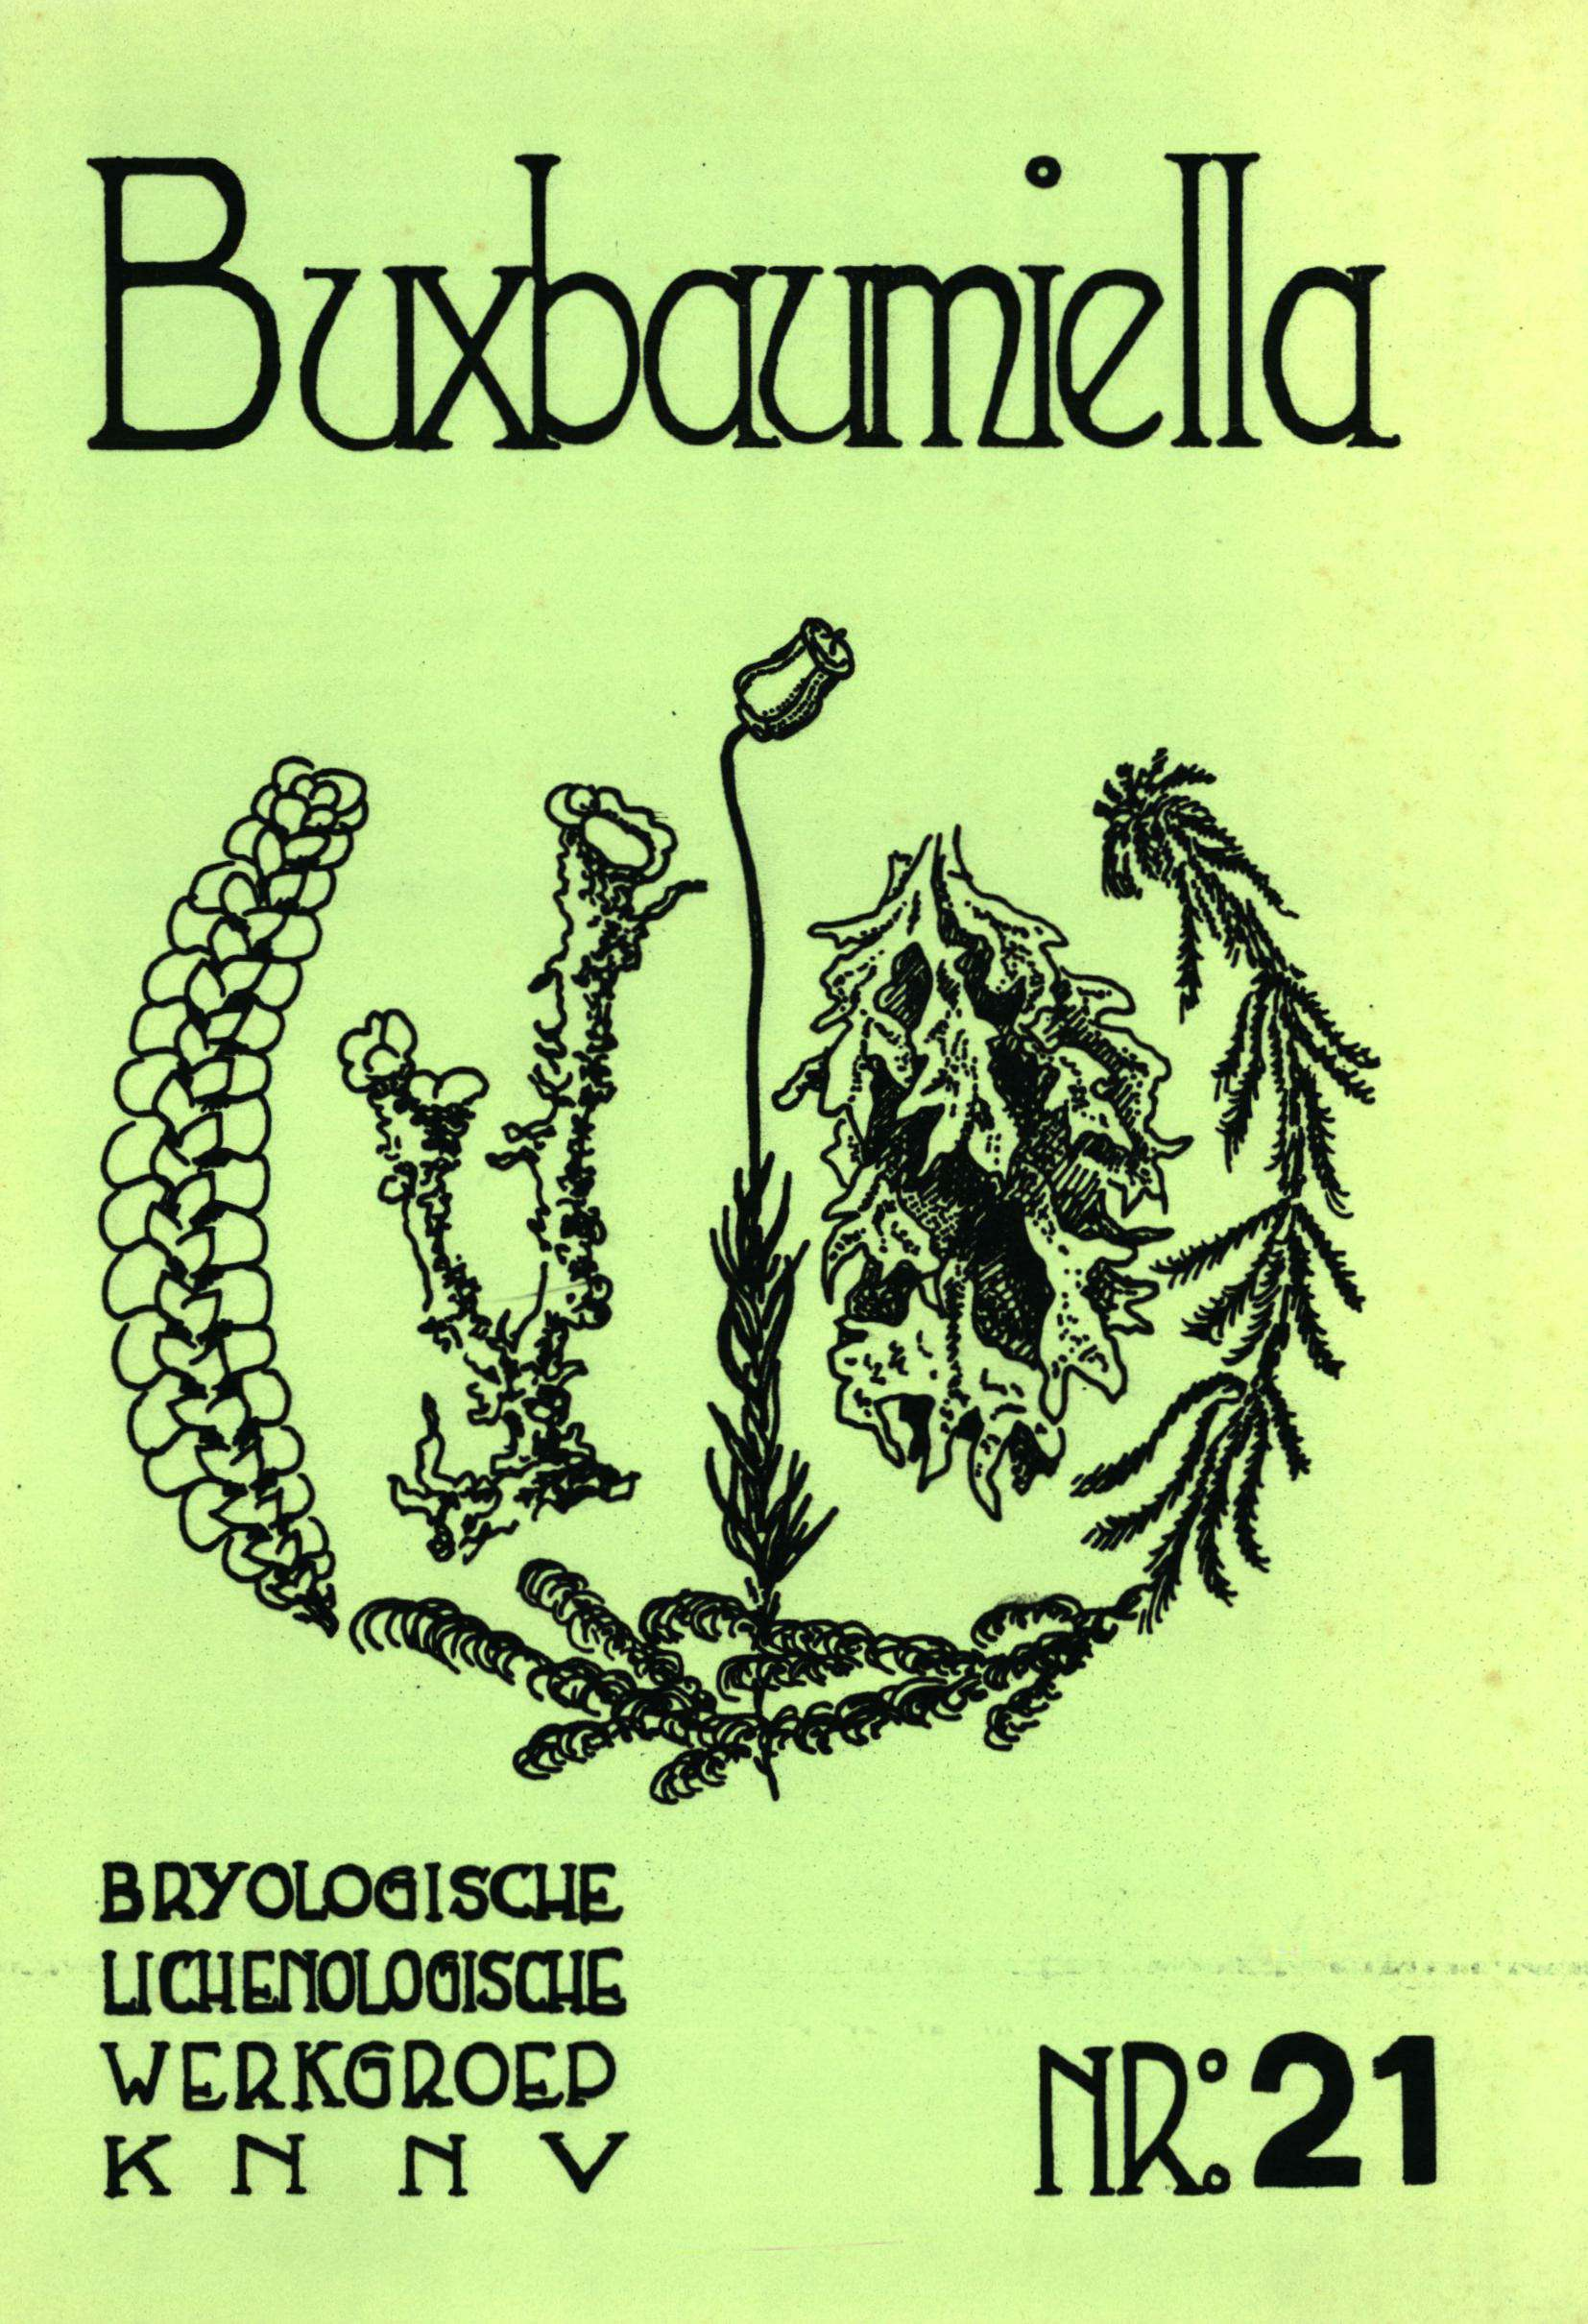 Buxbaumiella BRyOLOQISCUE